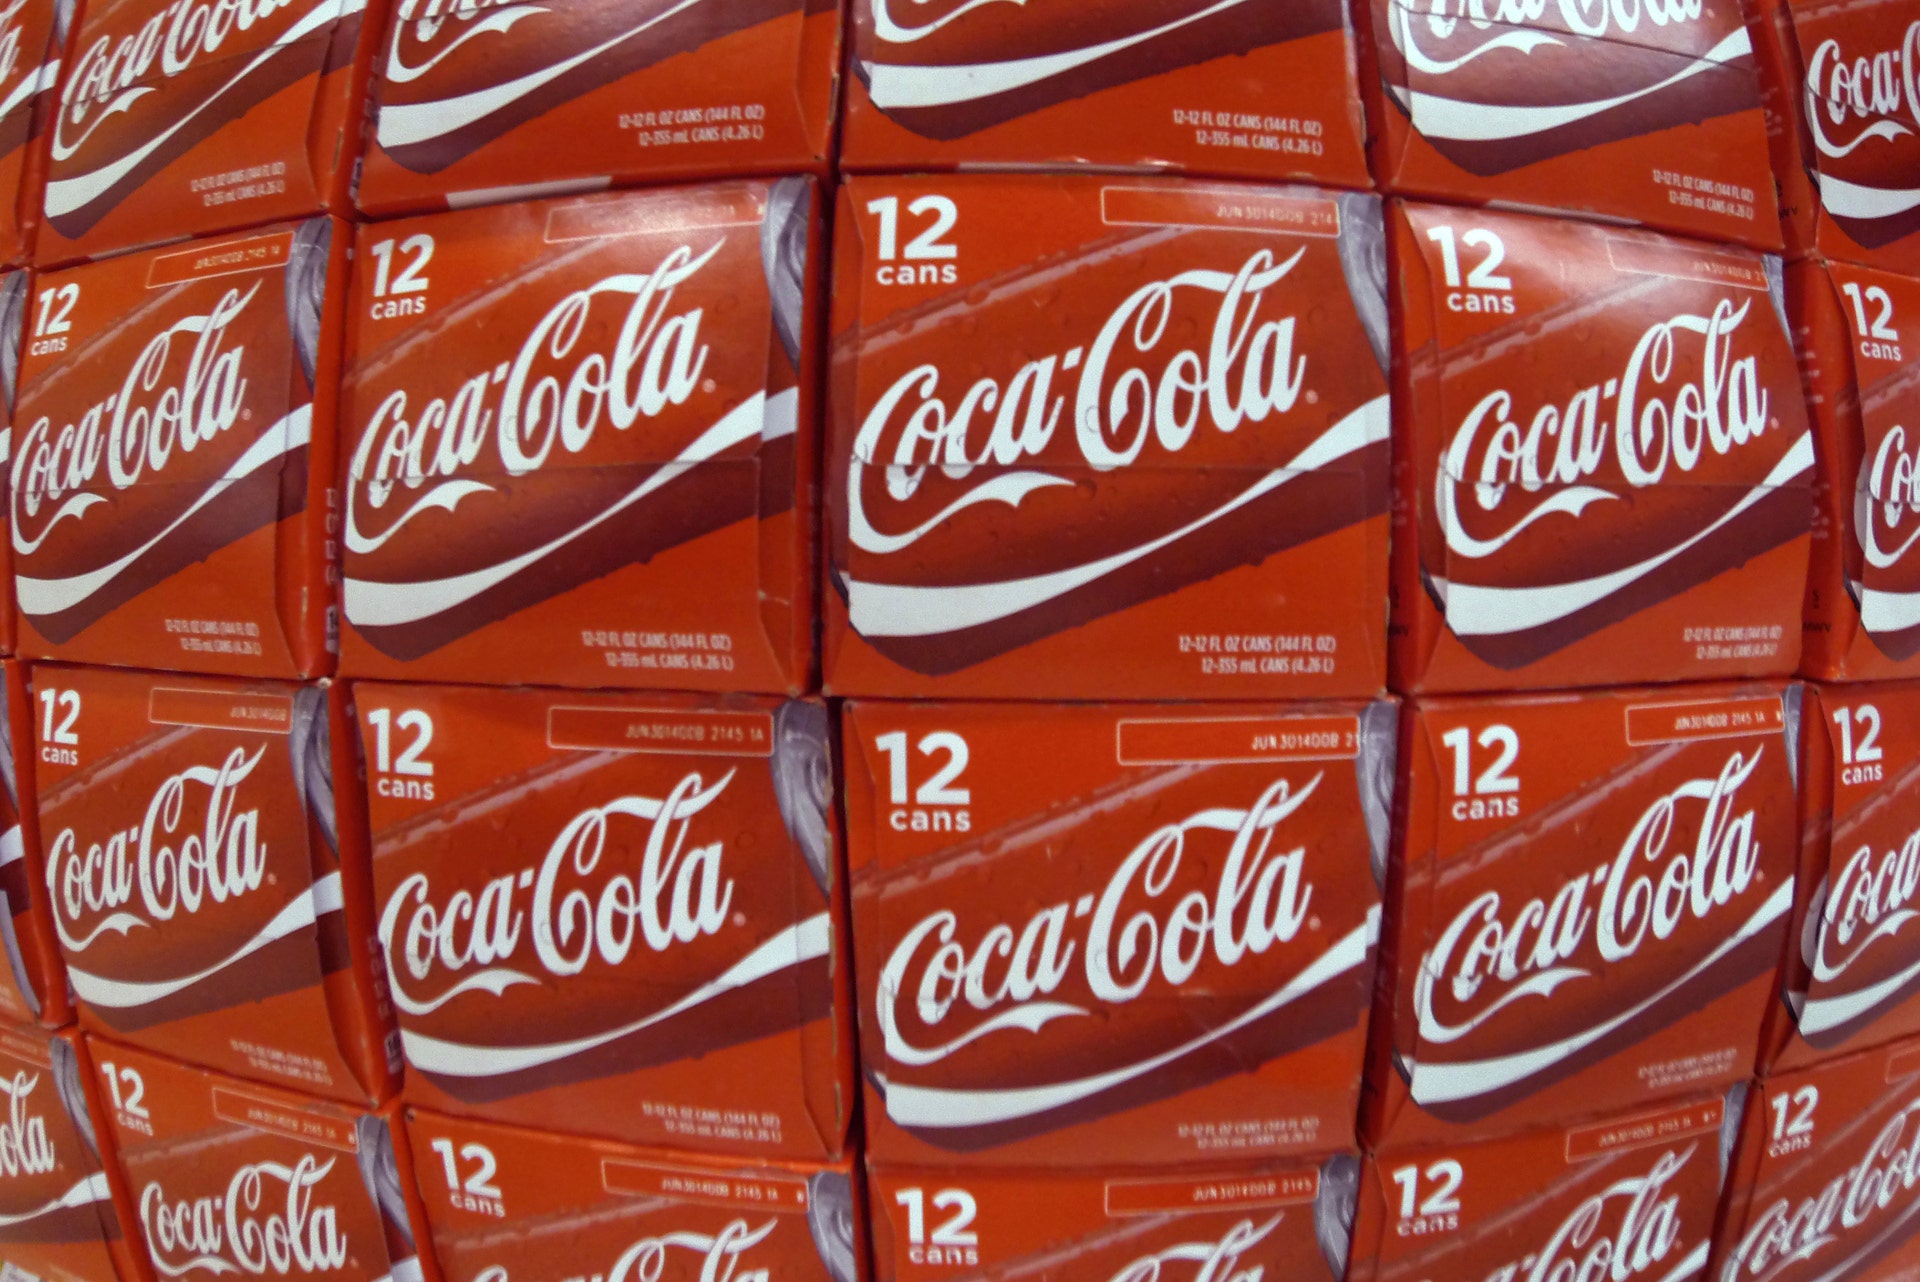 Coca-Cola results are boosted by vaccination of the vaccine as restaurants and venues reopen